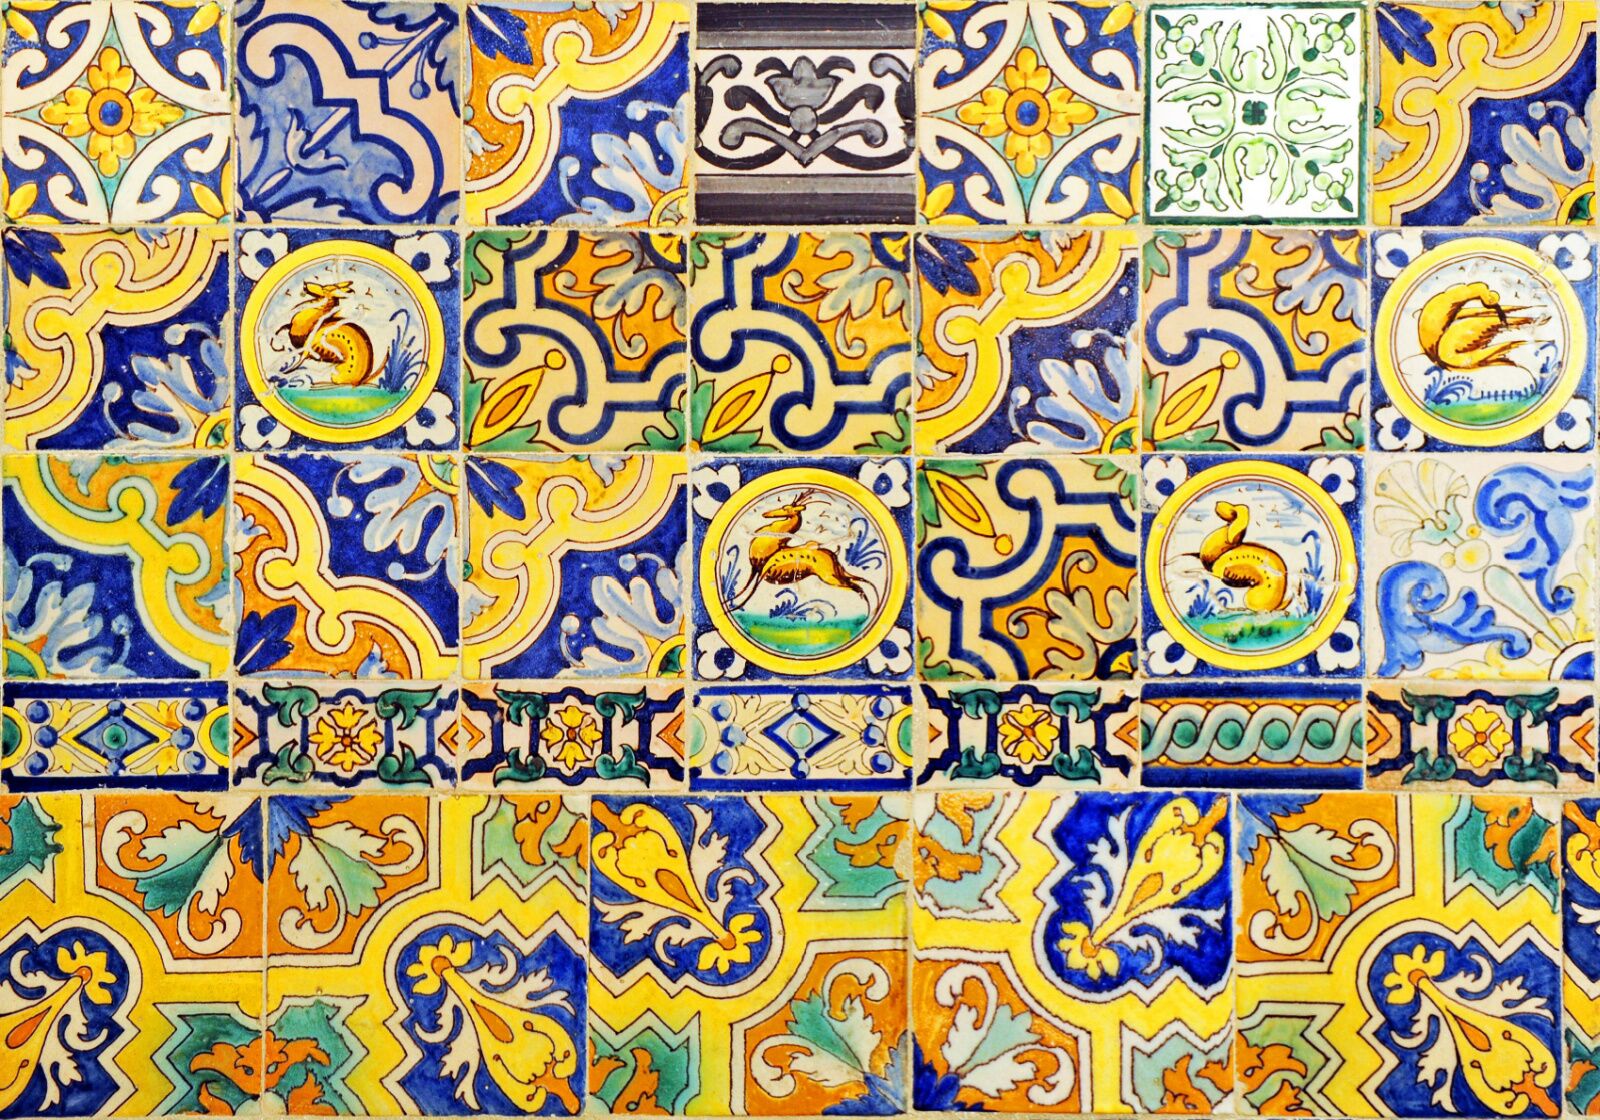 brightly colored ceramic tiles in Seville, Spain